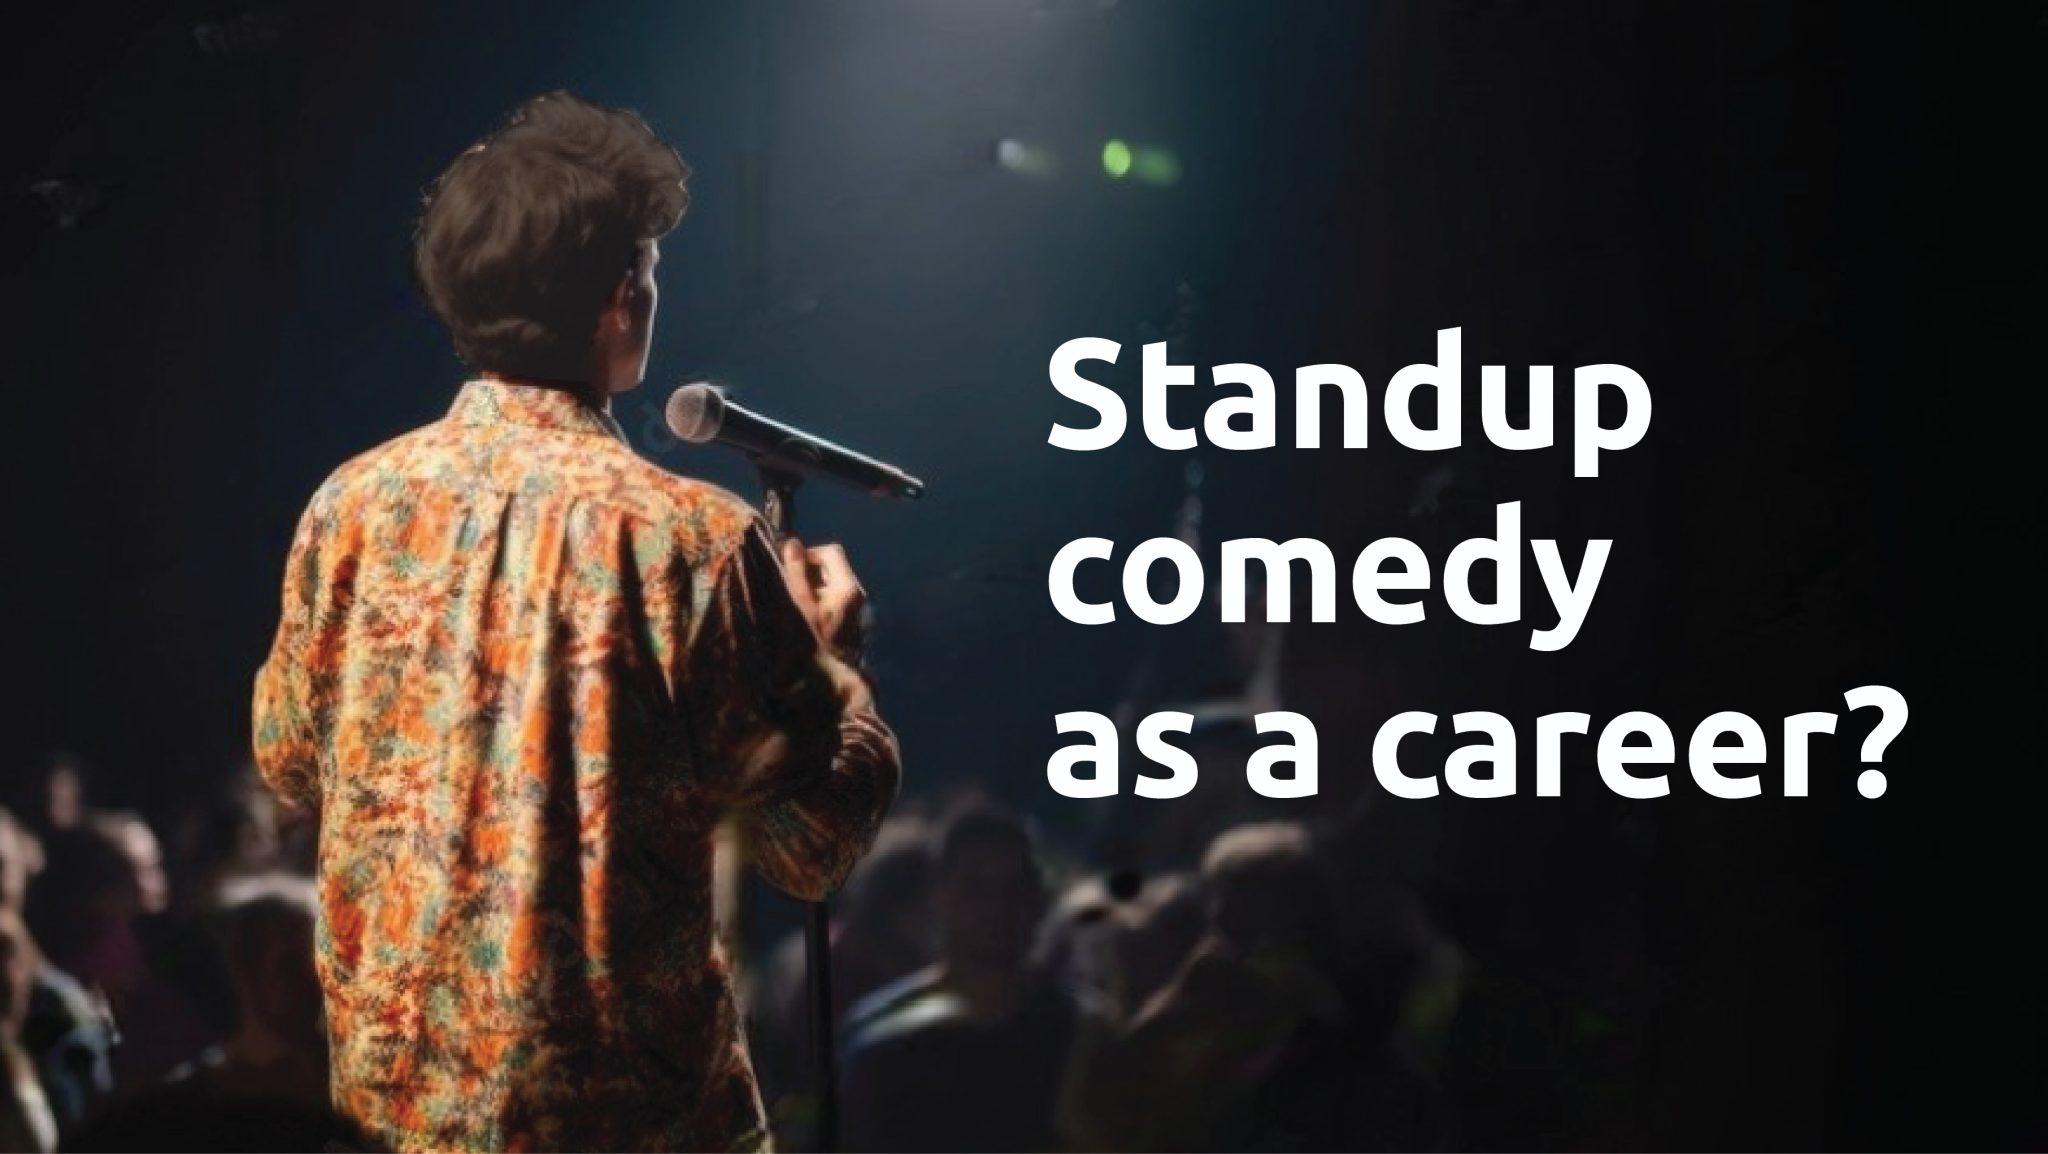 Standup comedy as a career?